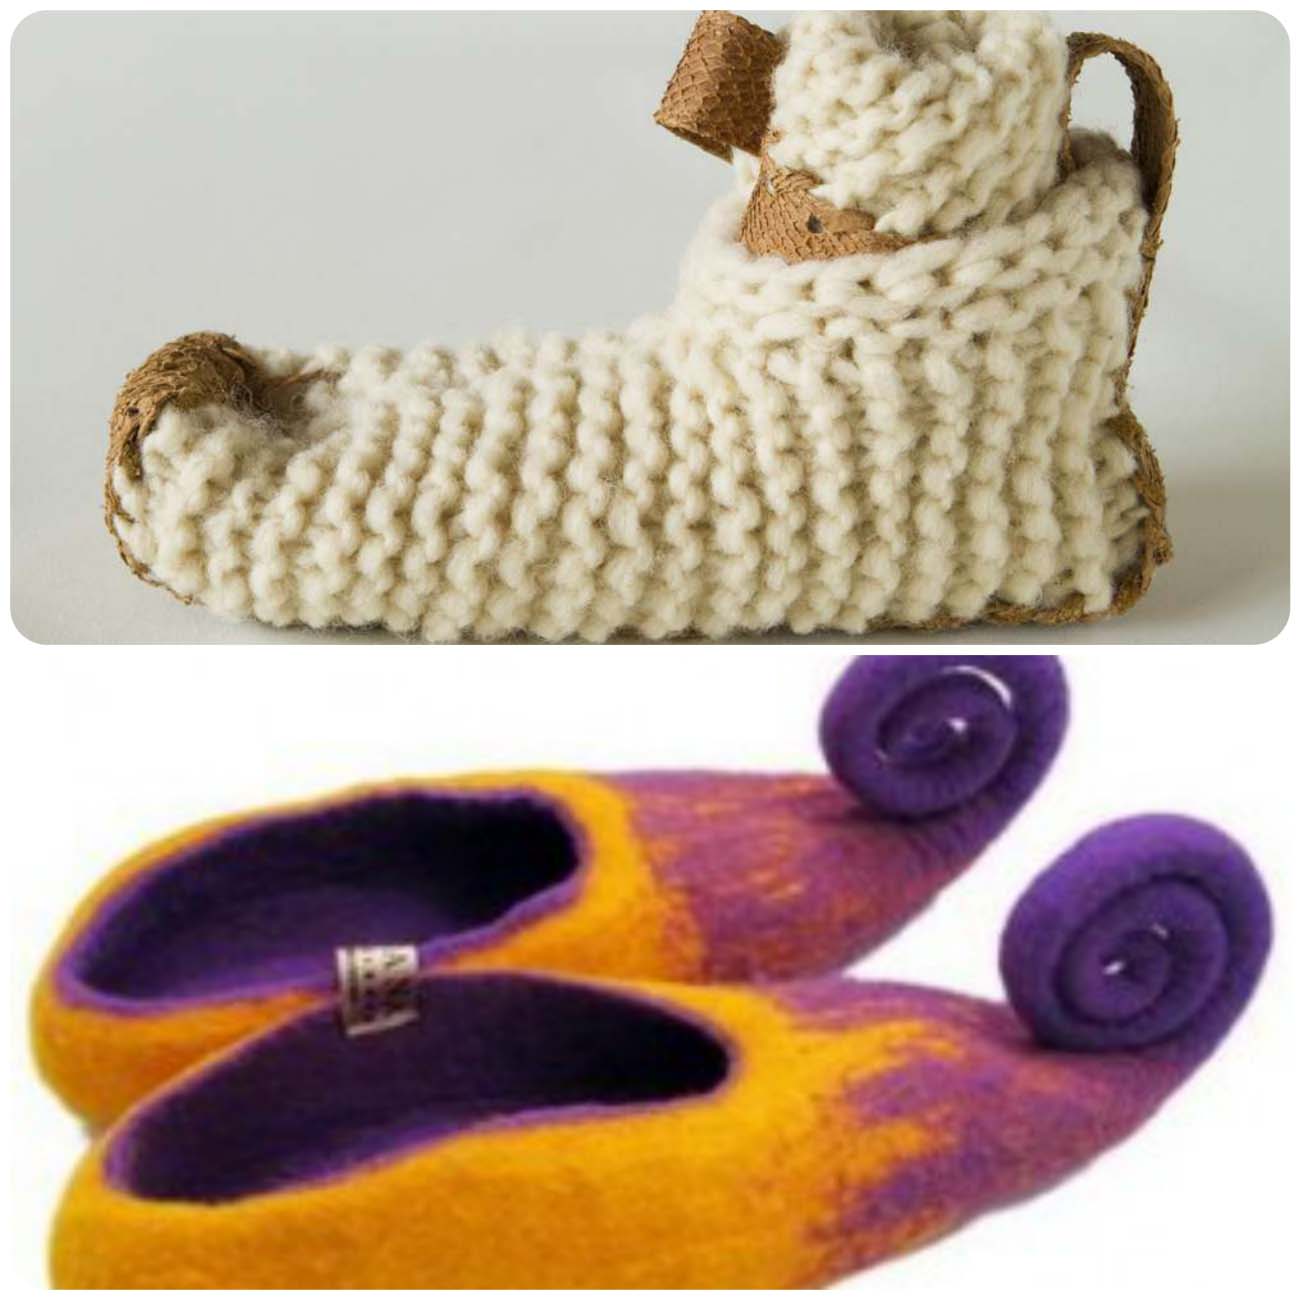 Best Tips To Keep Your Feet warm & Soft This Winter